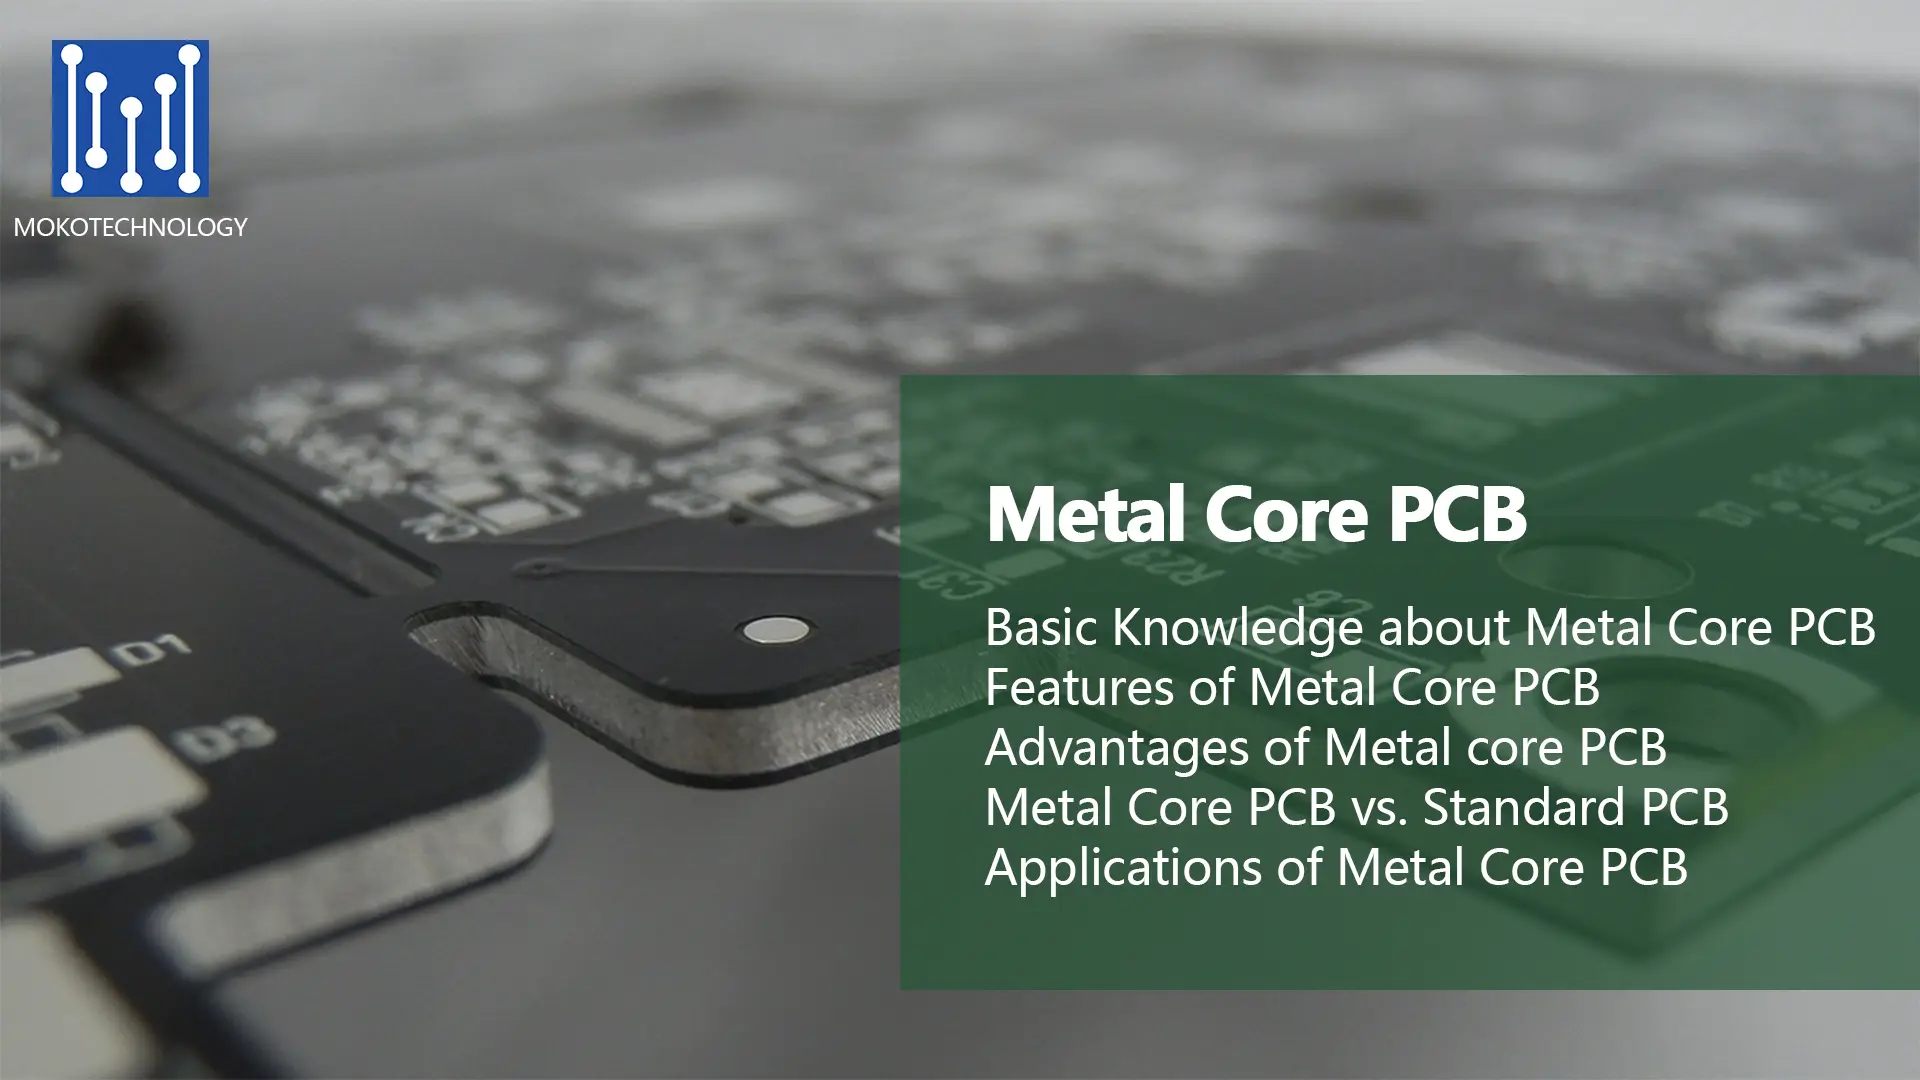 What Should You Know about Metal Core PCB